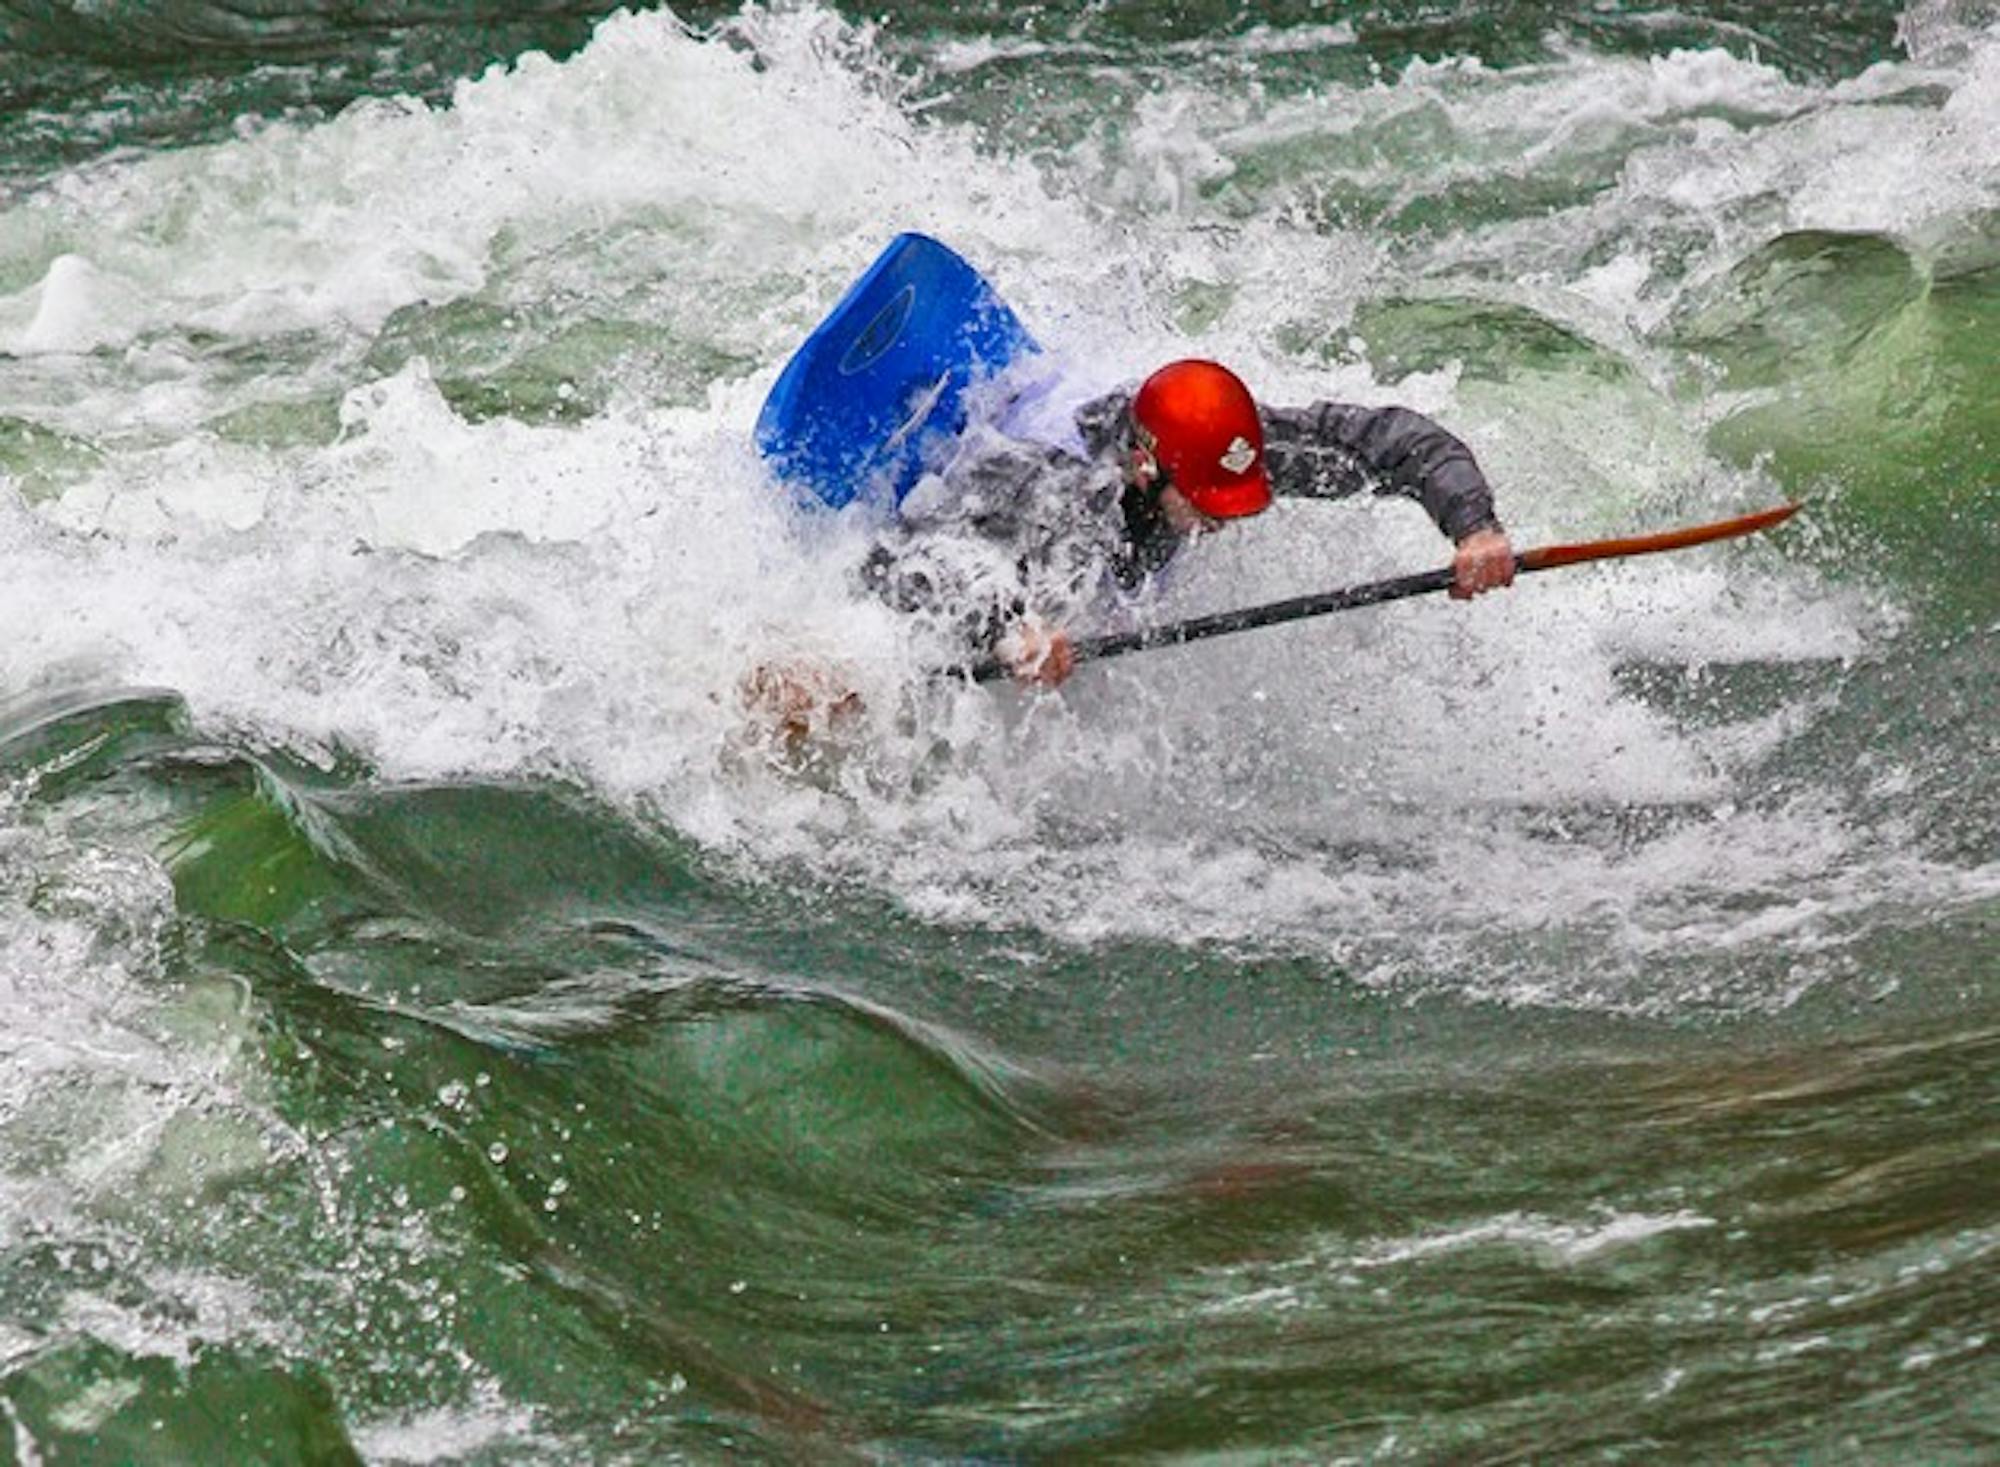 Competitors at the festival saw numerous events, including races, a triathlon, and a freestyle competition on the rapids.